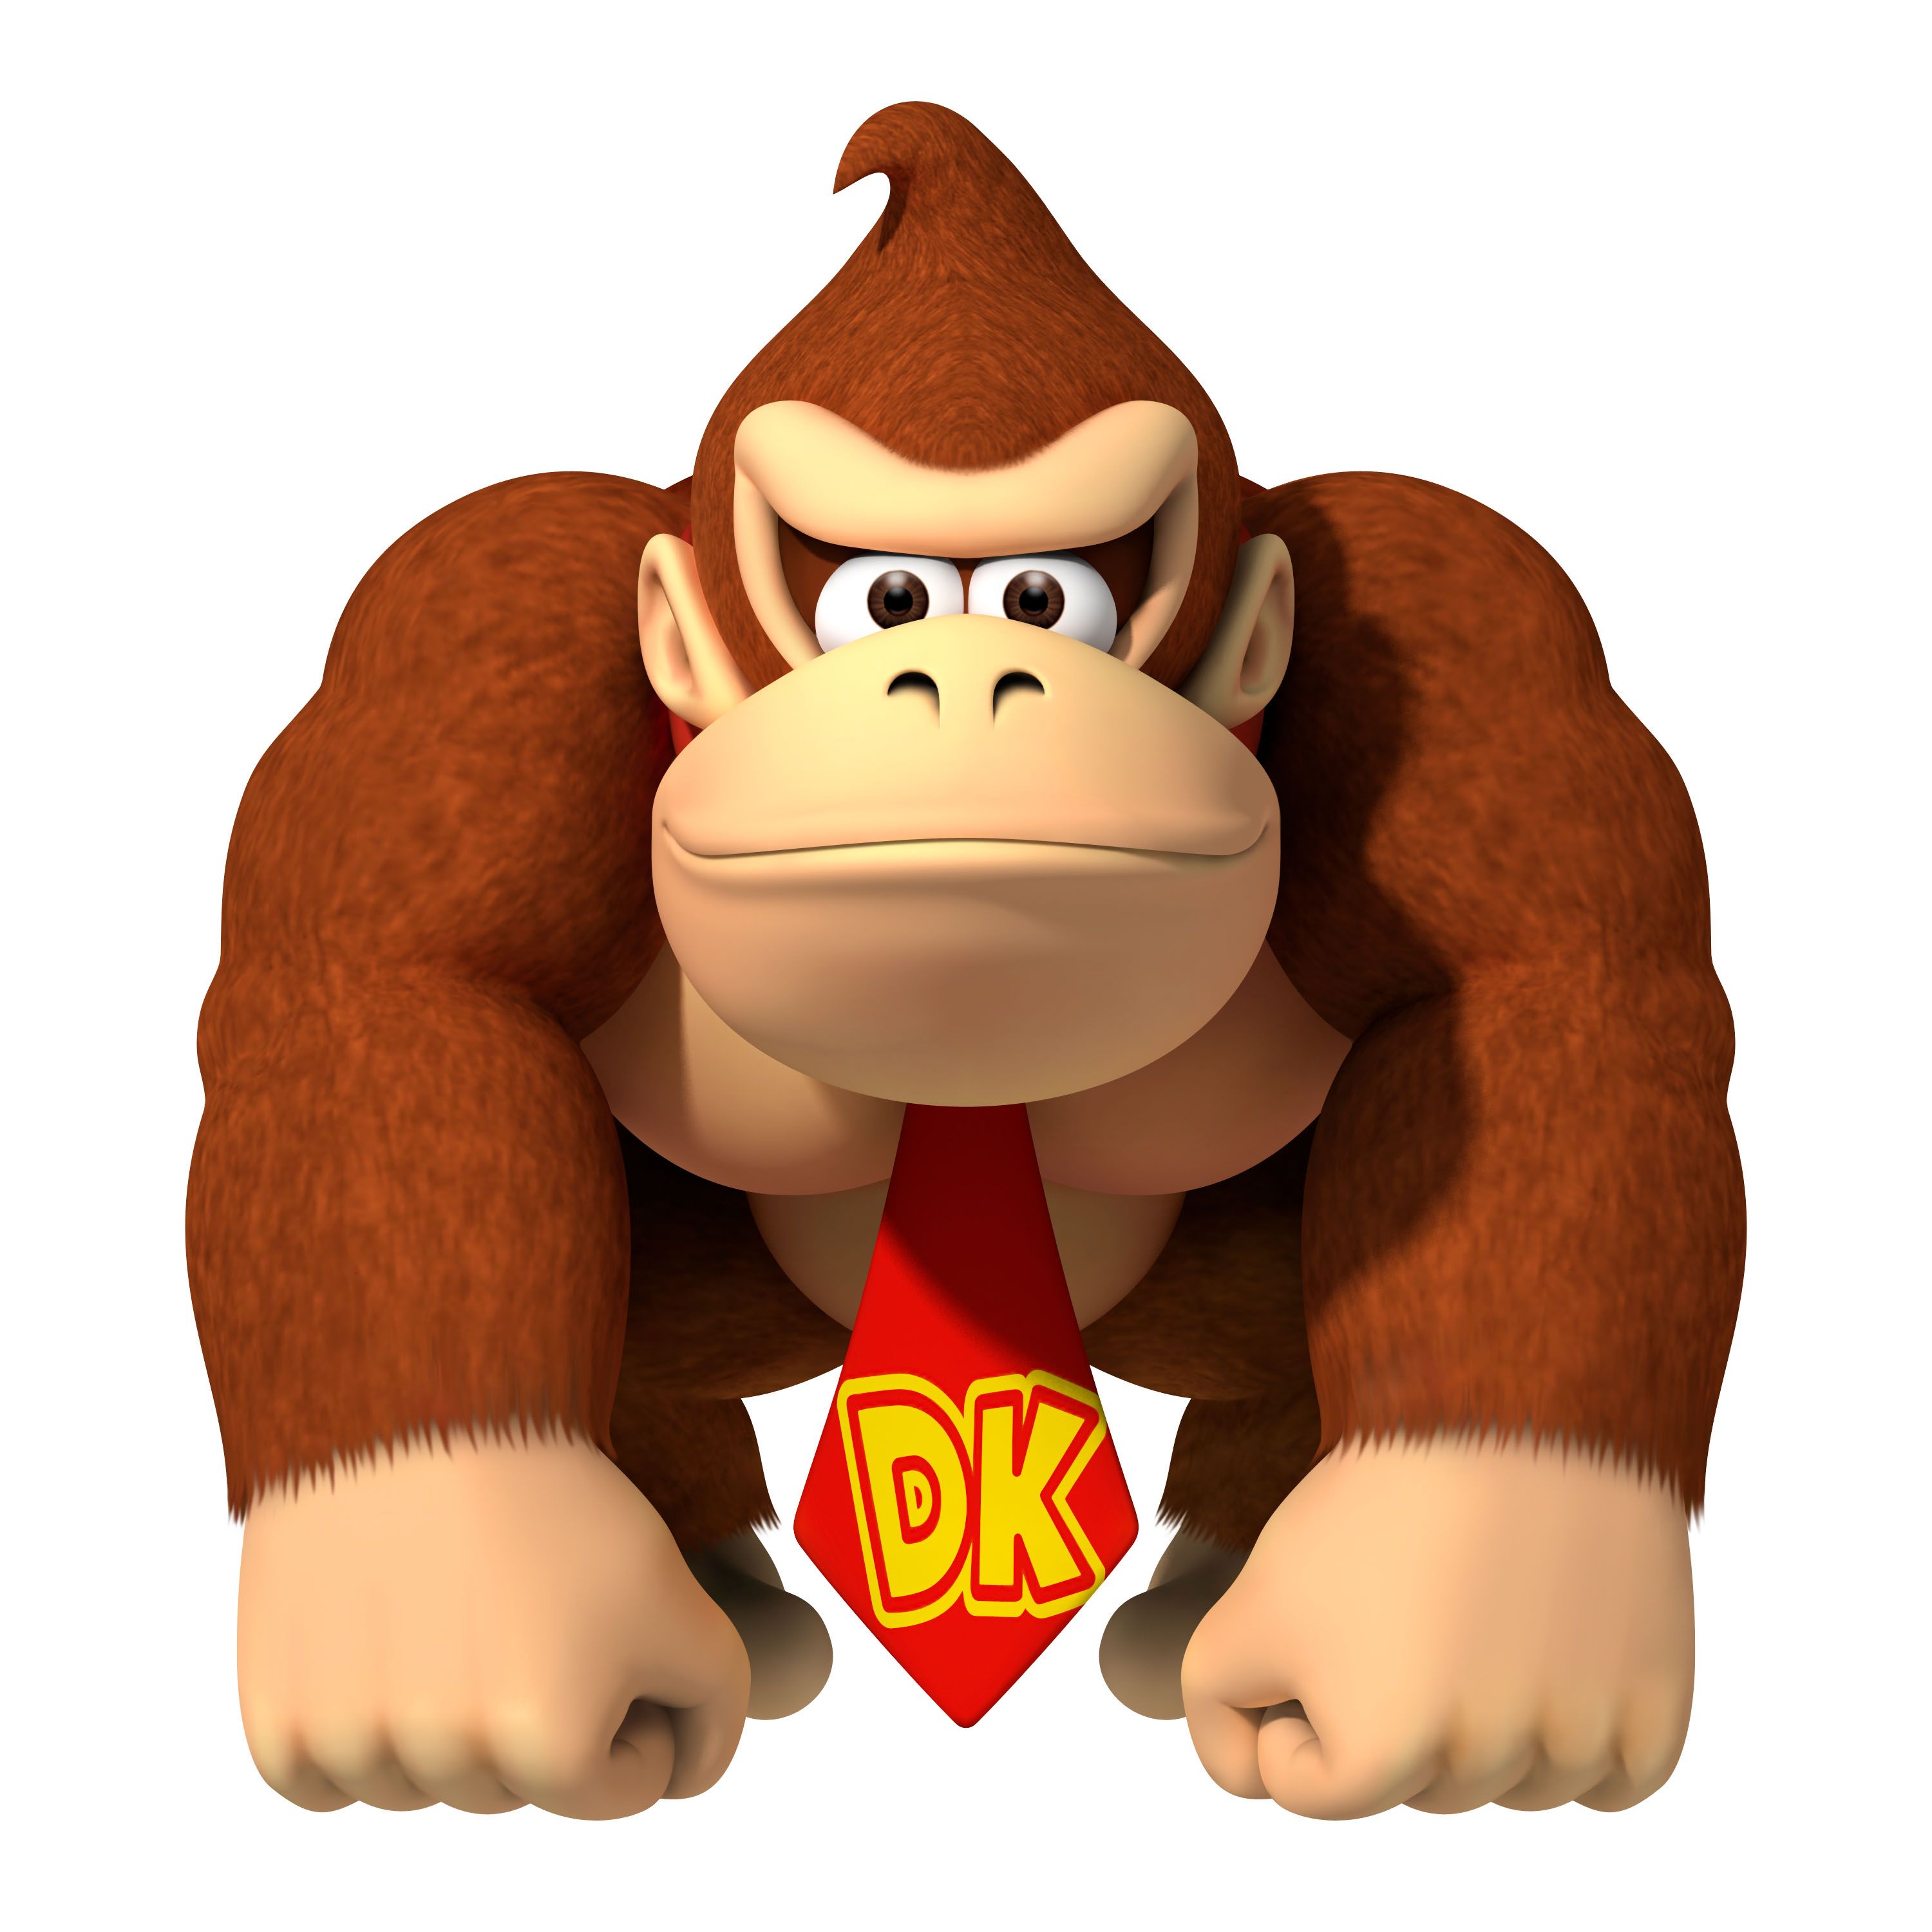 real sizes of video game characters - Donkey Kong